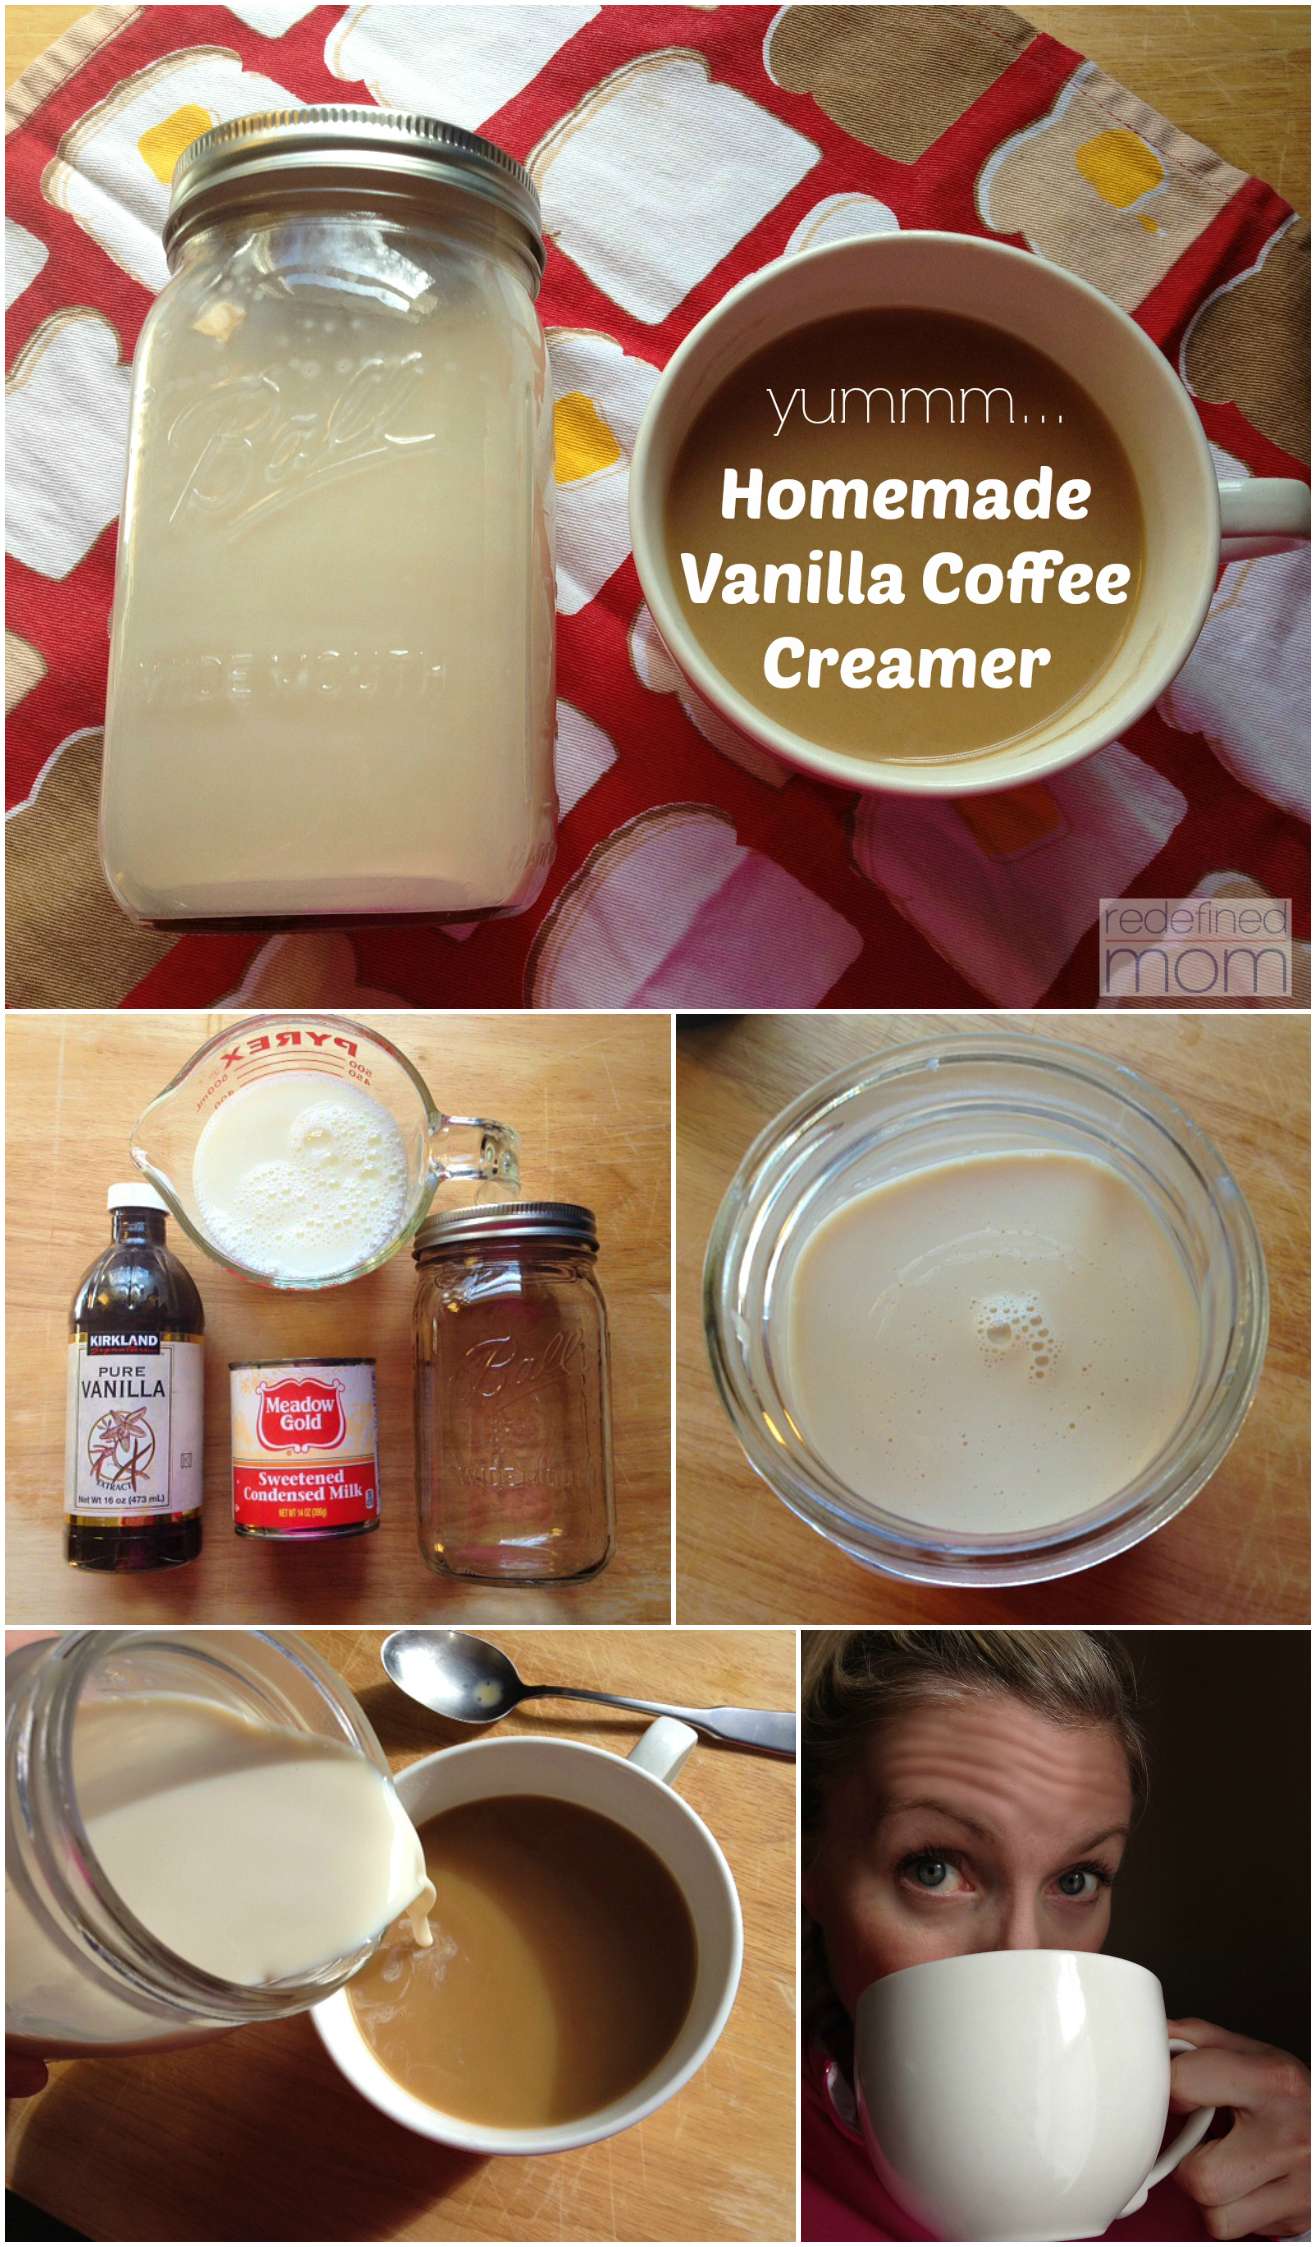 How To Make Coffee Creamer Without Condensed Milk / Homemade Coffee ...